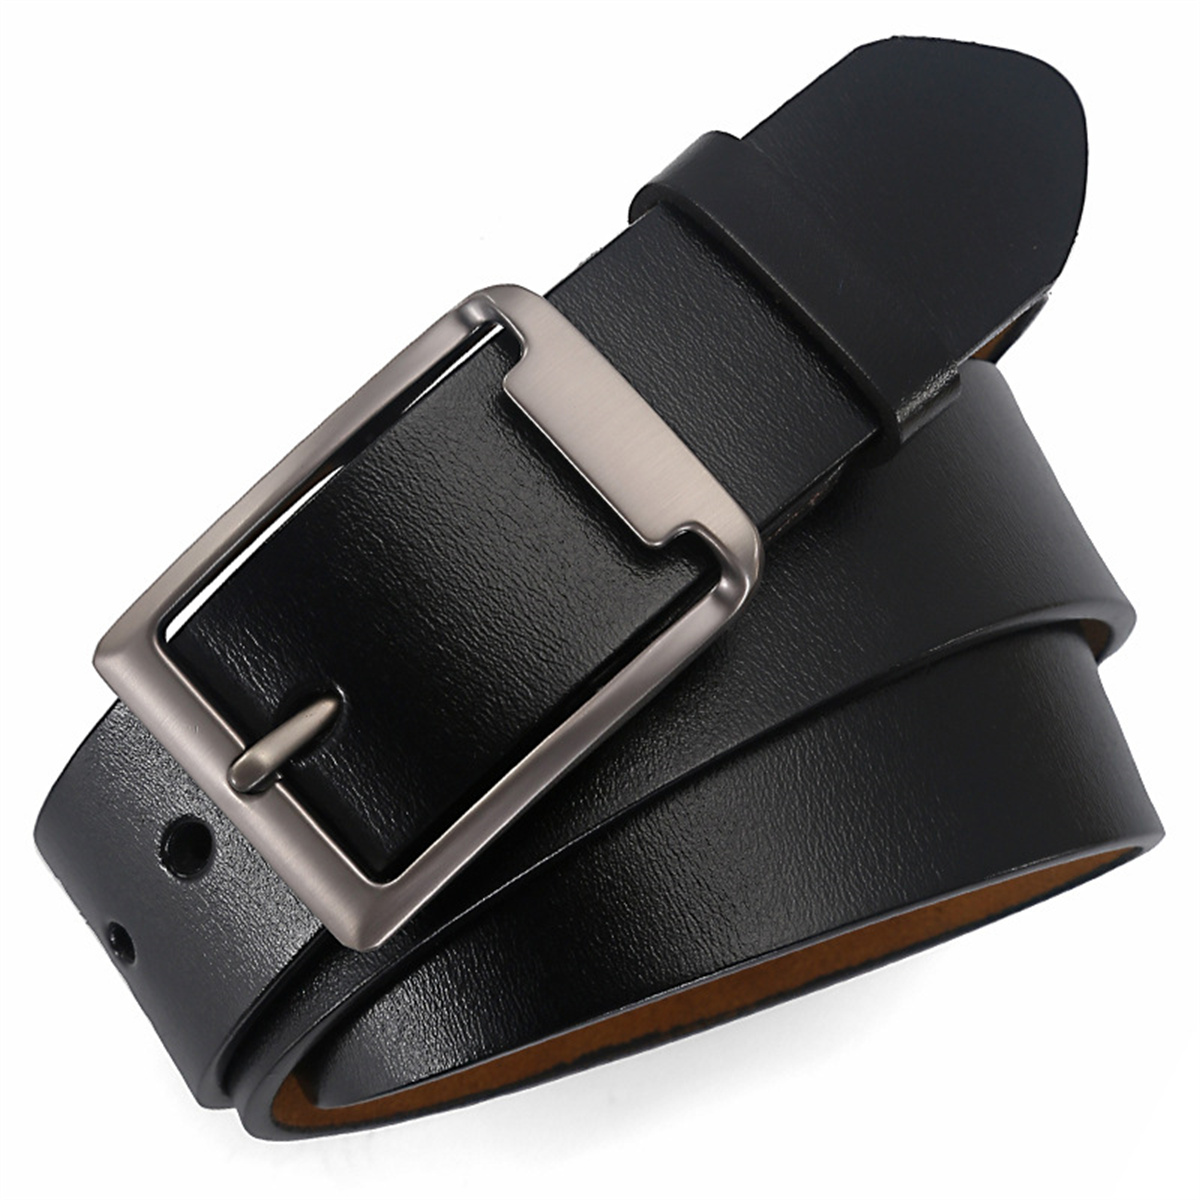 1pc Large Pin Buckle Genuine Leather Buckle Belts For Men Fashion